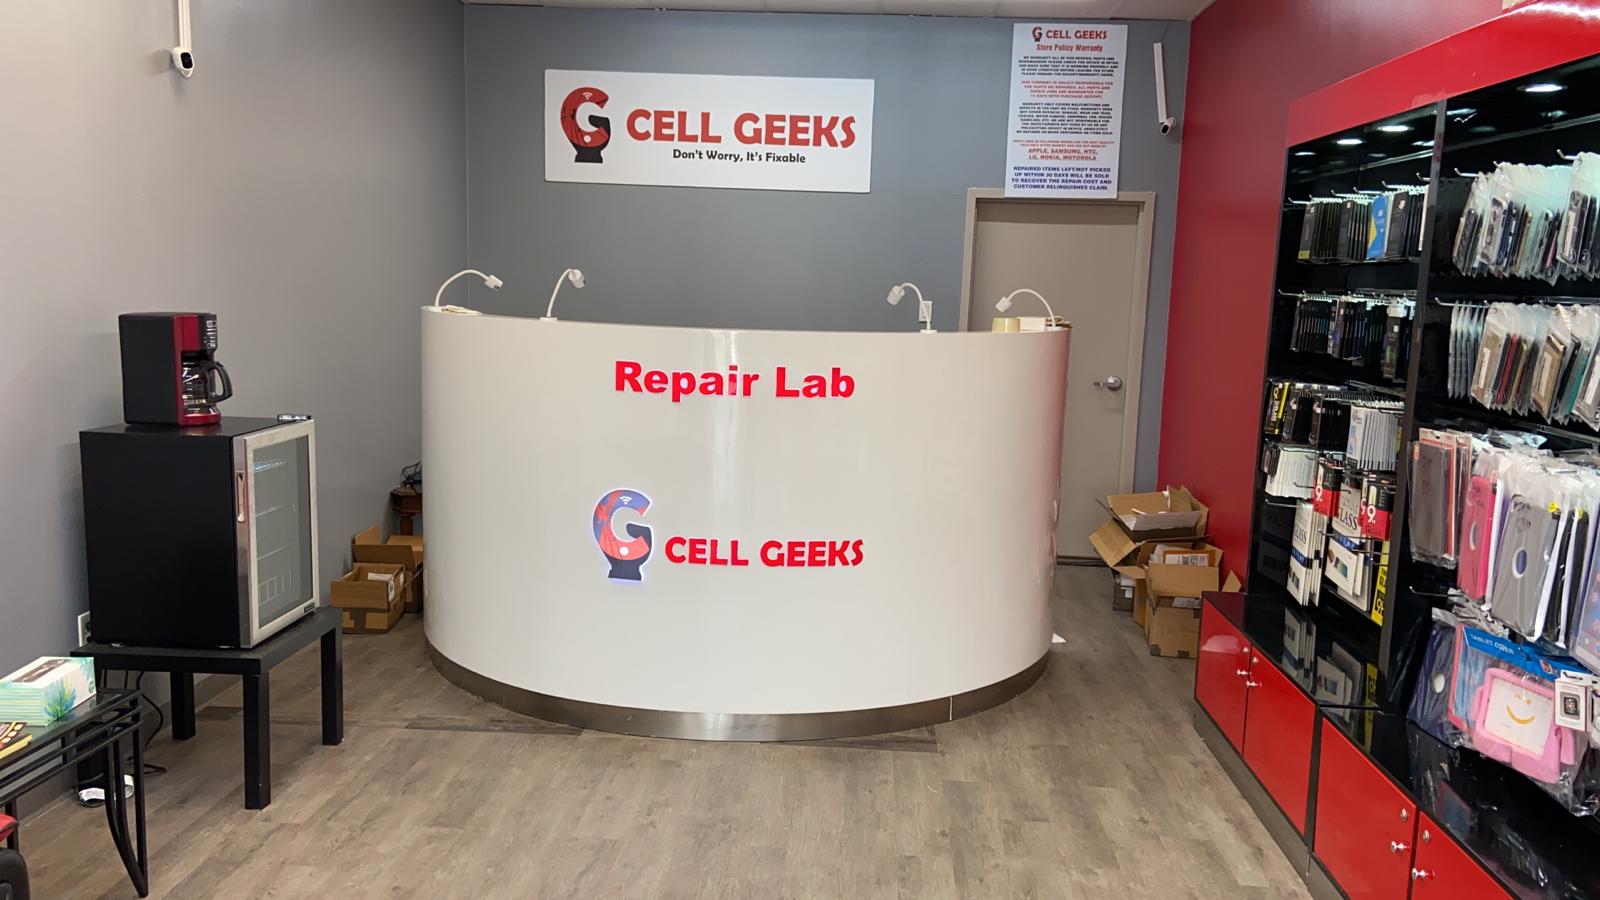 Cell Geeks have partnered with RepairDesk